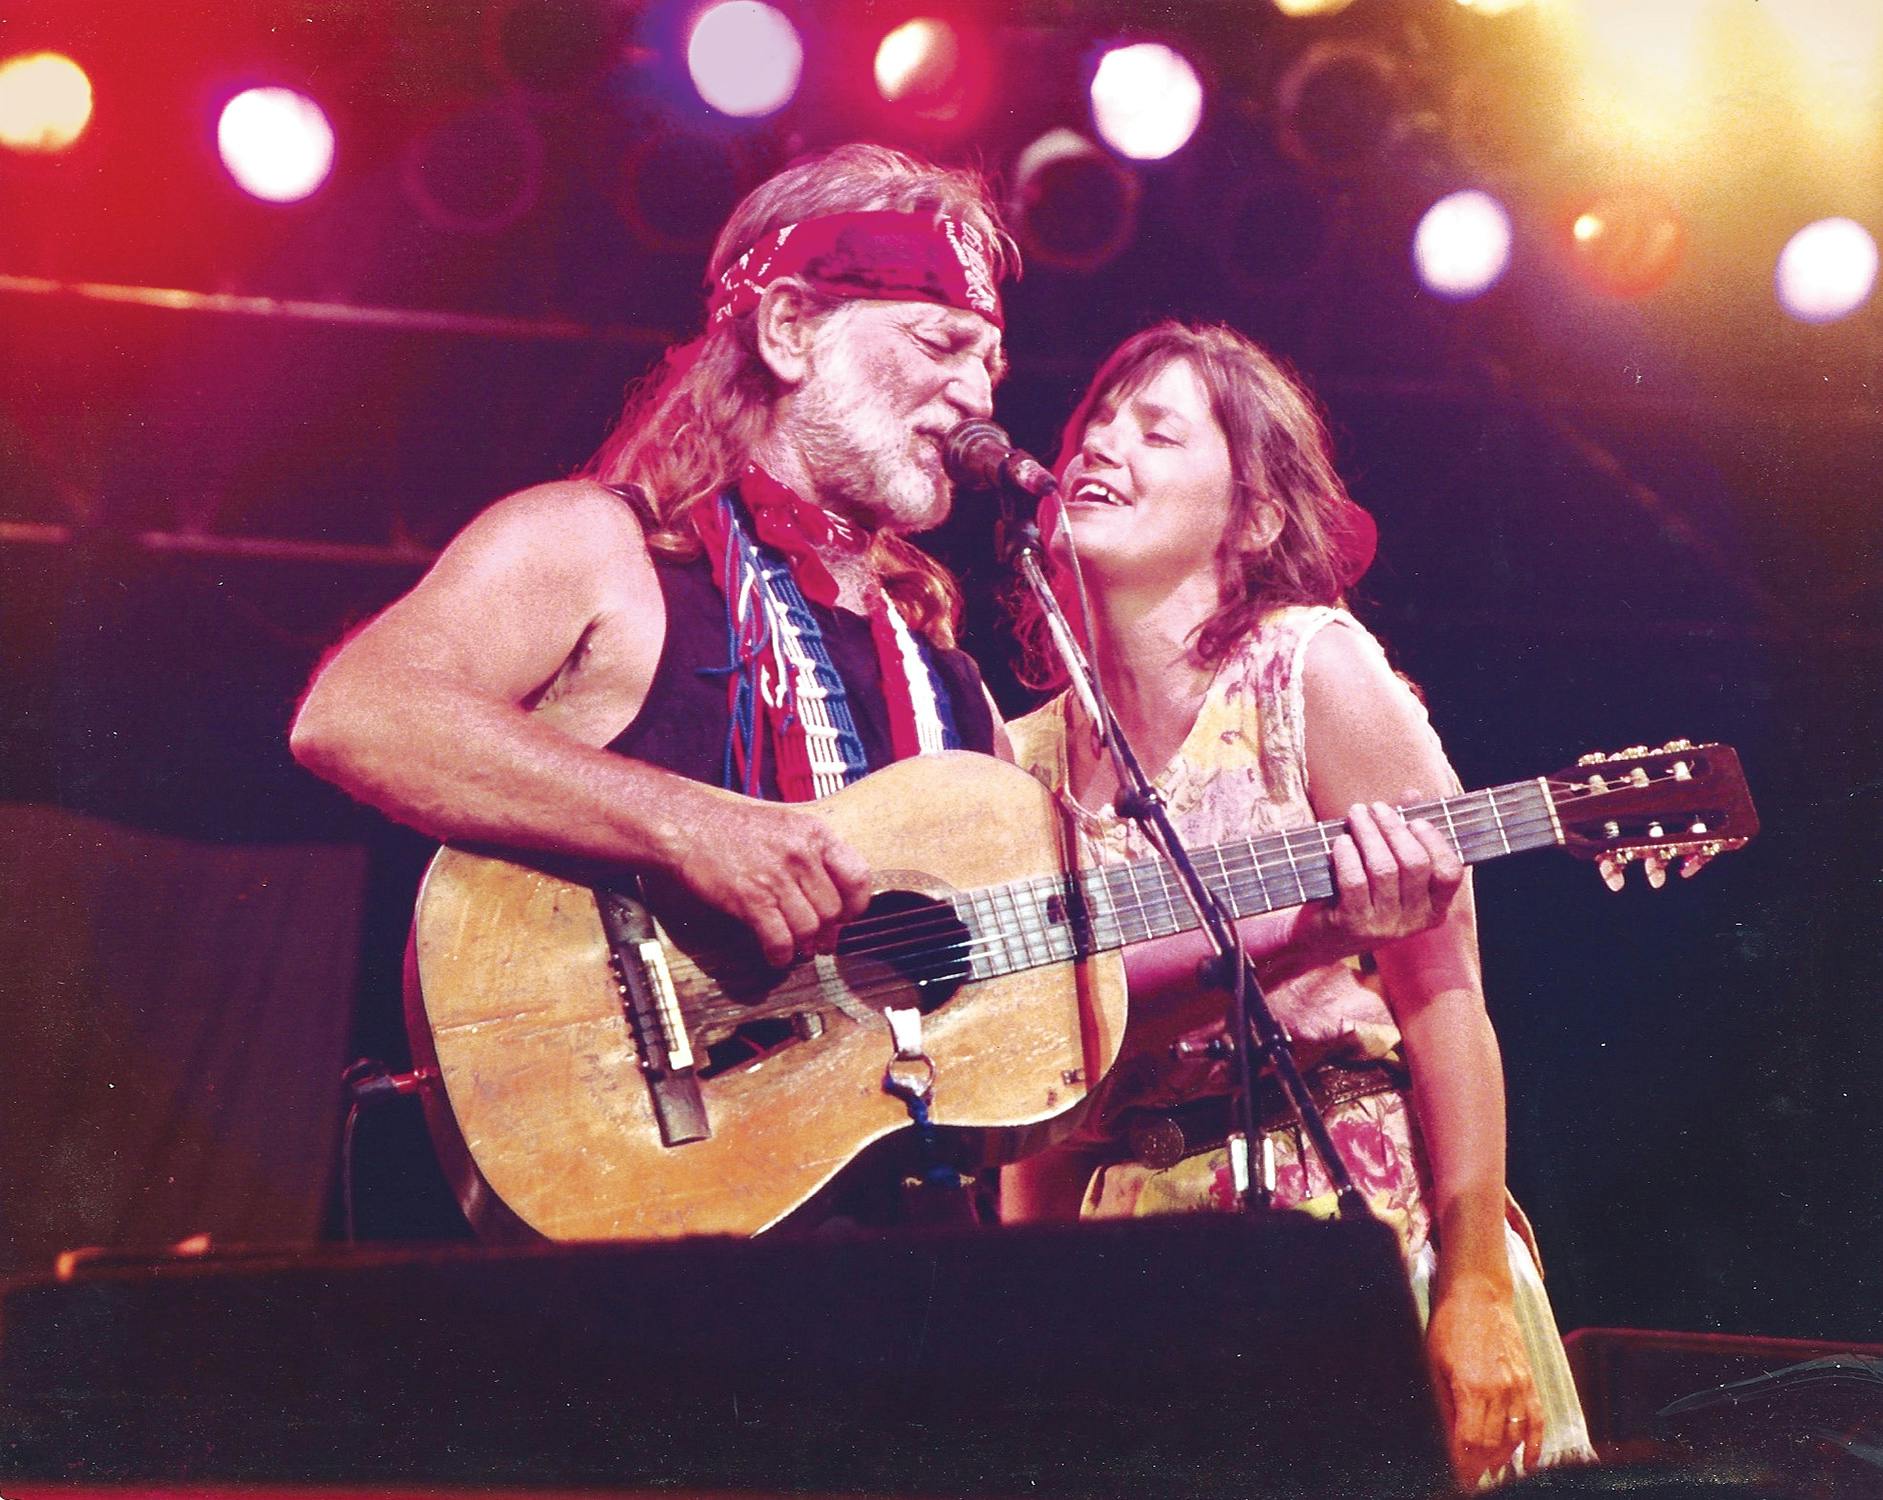 Willie and Kimmie roads winging together into a microphone against a backdrop of stage lights. 